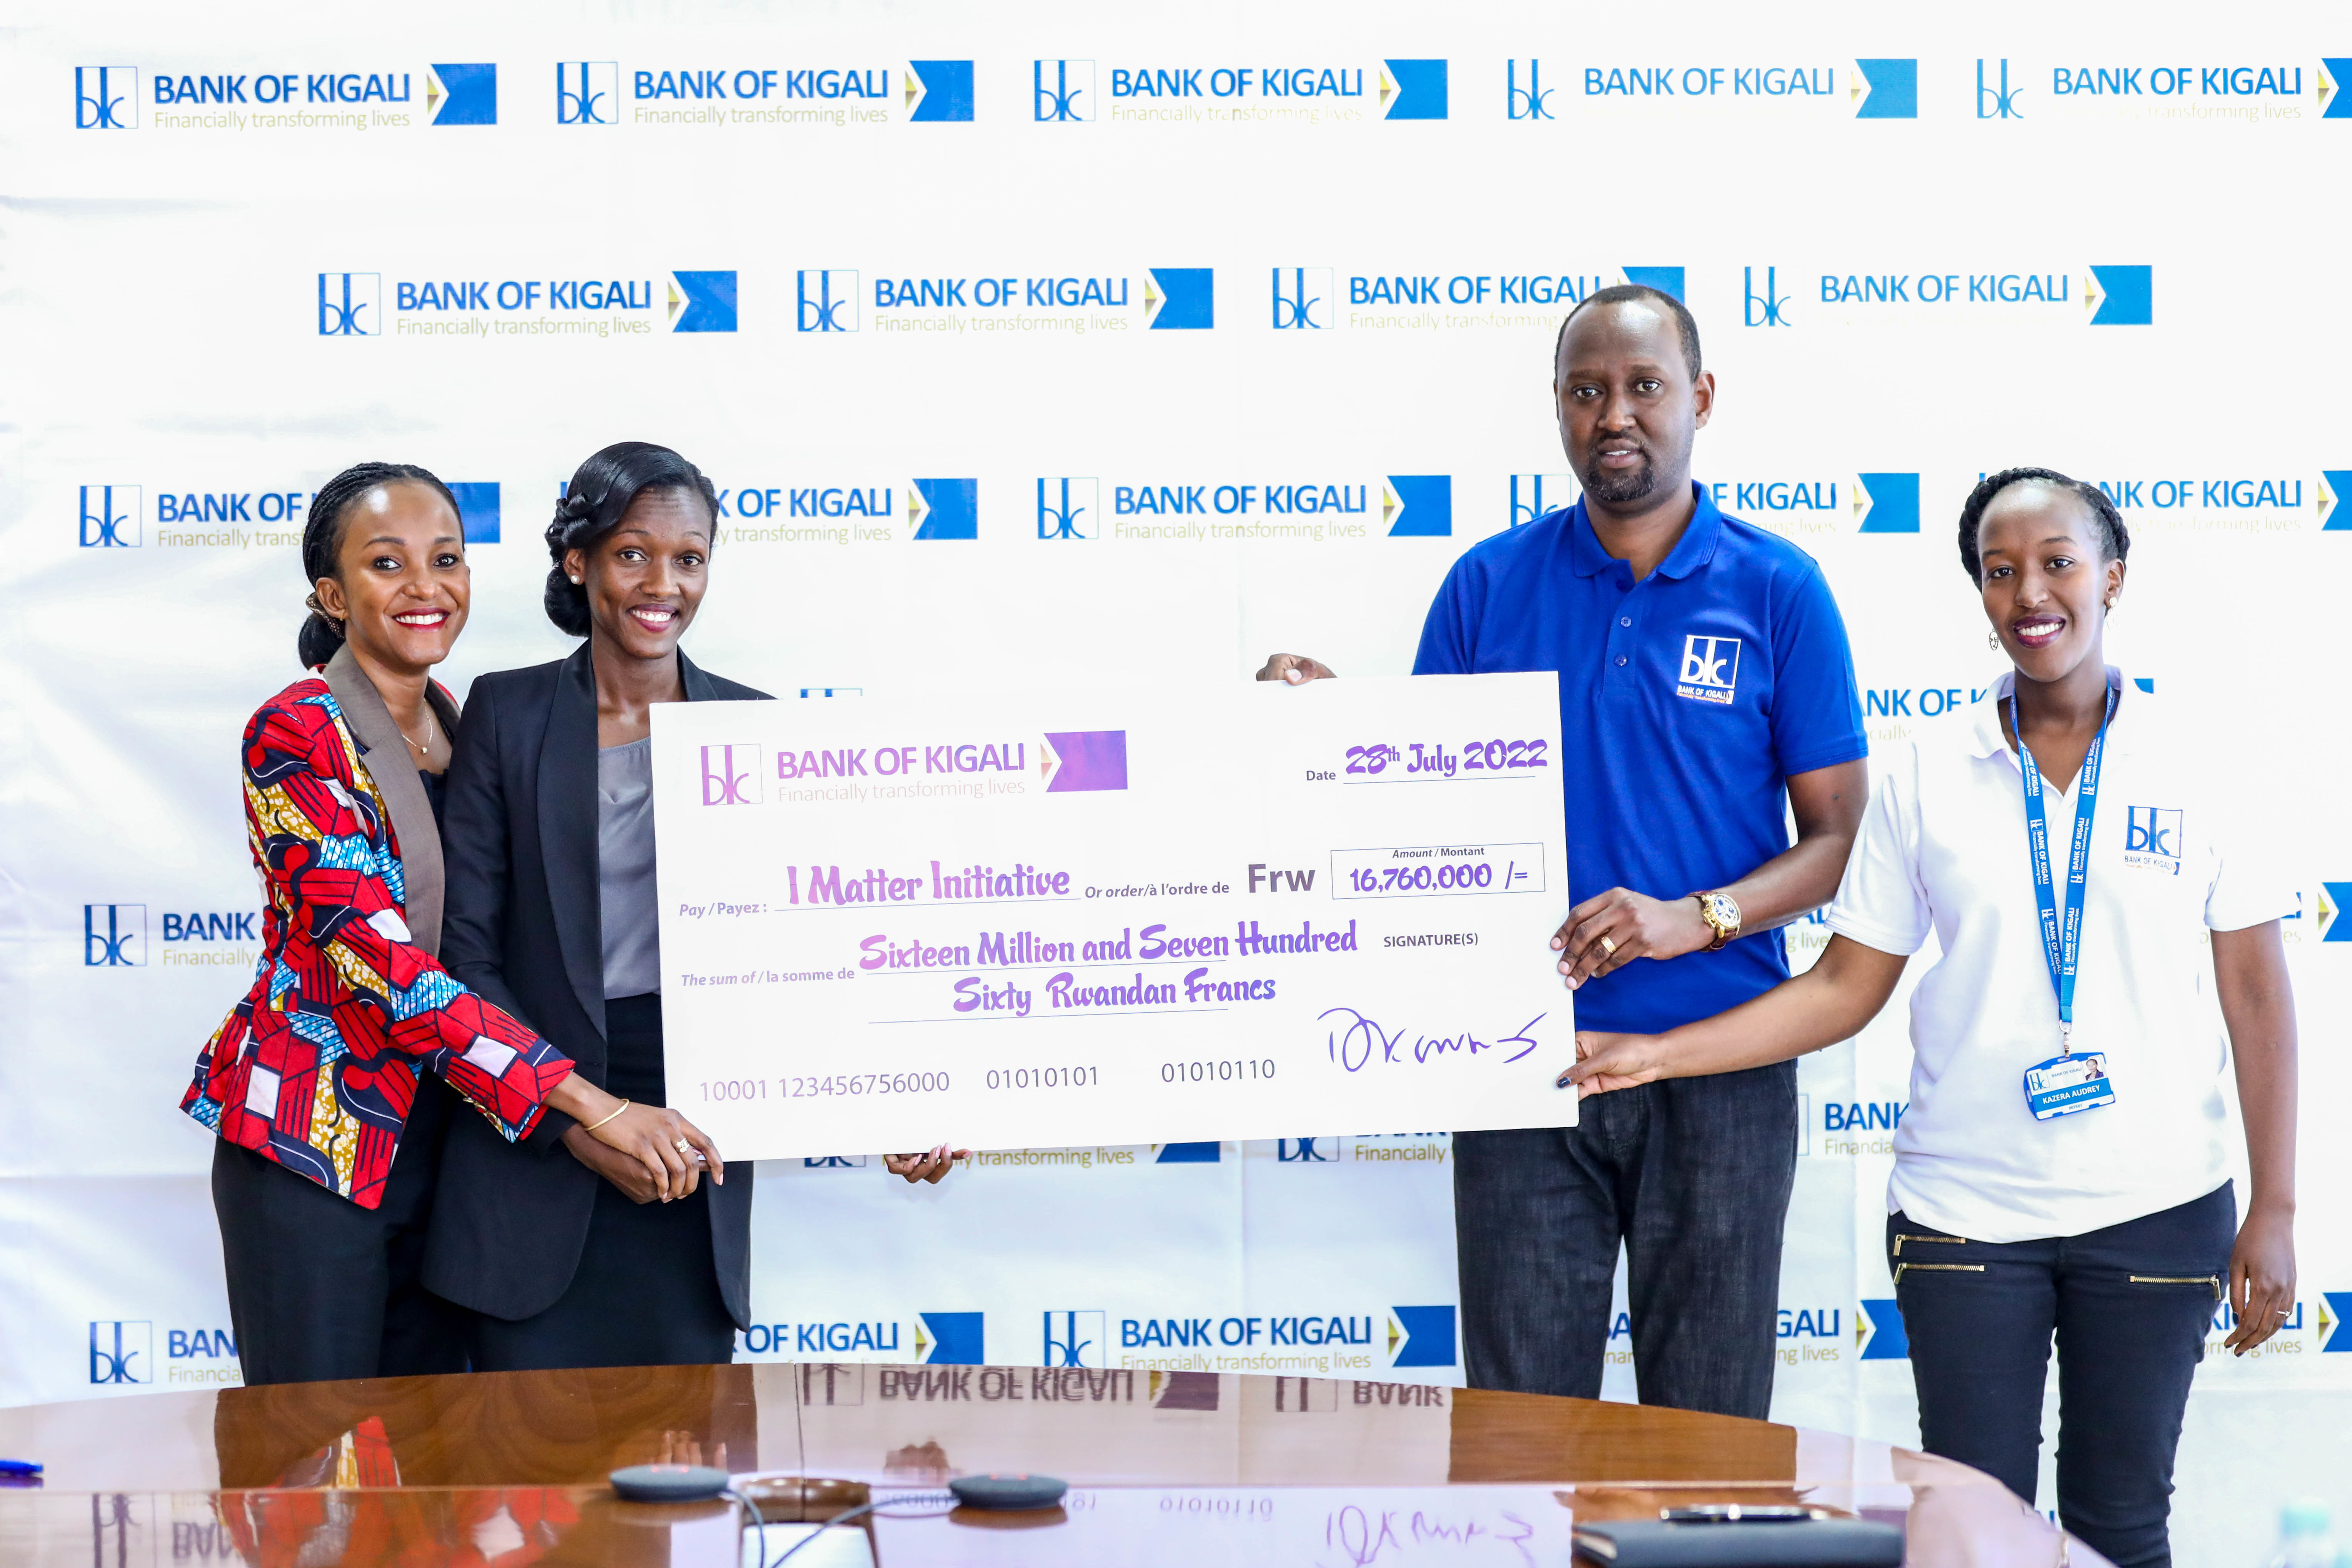 Emmanuel Nkusi Batanage, Head of Corporate Affairs at Bank of Kigali (2nd right), hands over the dummy cheque to Divine Ingabire, I Matter Initiative Executive Director (2nd left), during the launch of the partnership in Kigali on July 28. Photos: Dan Nsengiyumva.